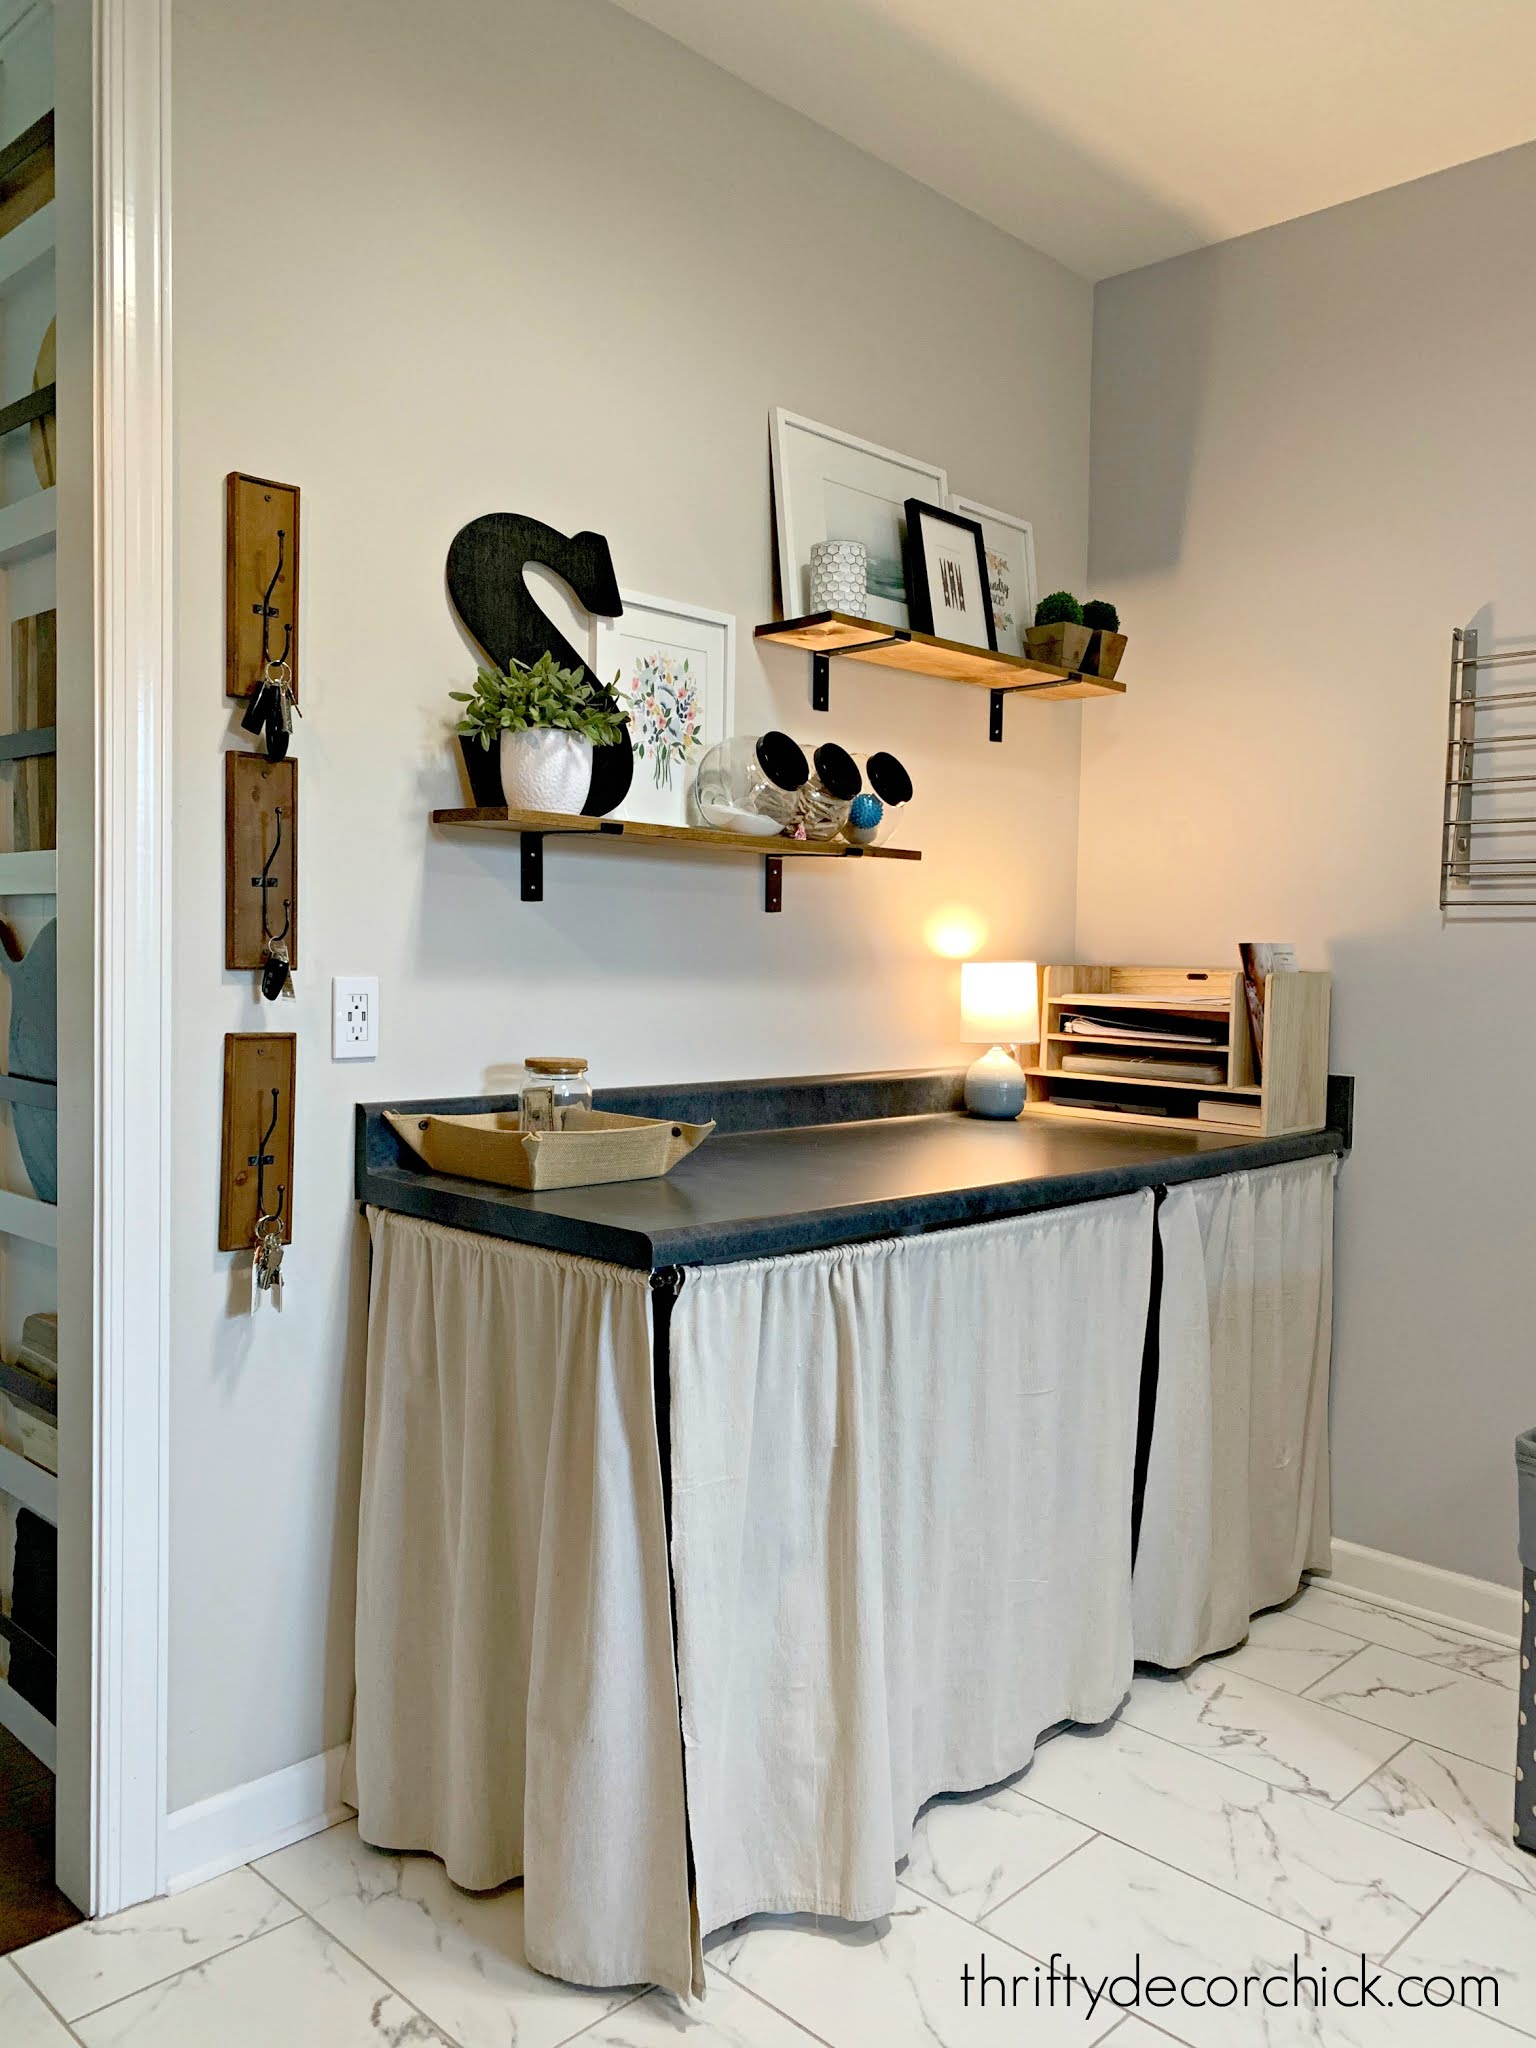 Using Cabinets To Organize Your Laundry Room - CT Kitchen & Bath